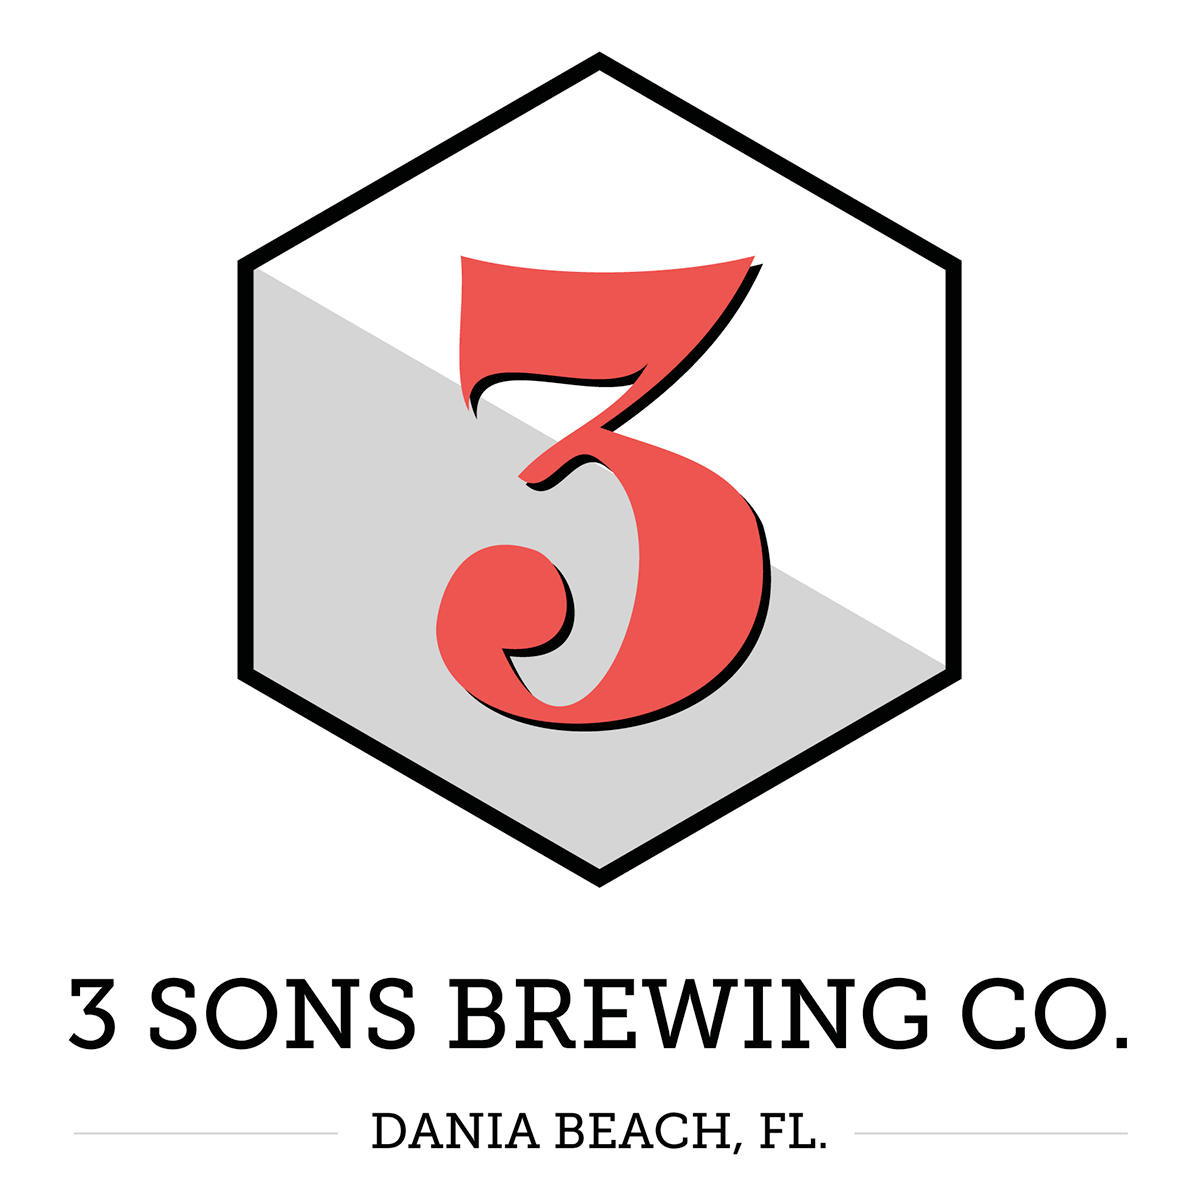 3 sons brewing co logo.